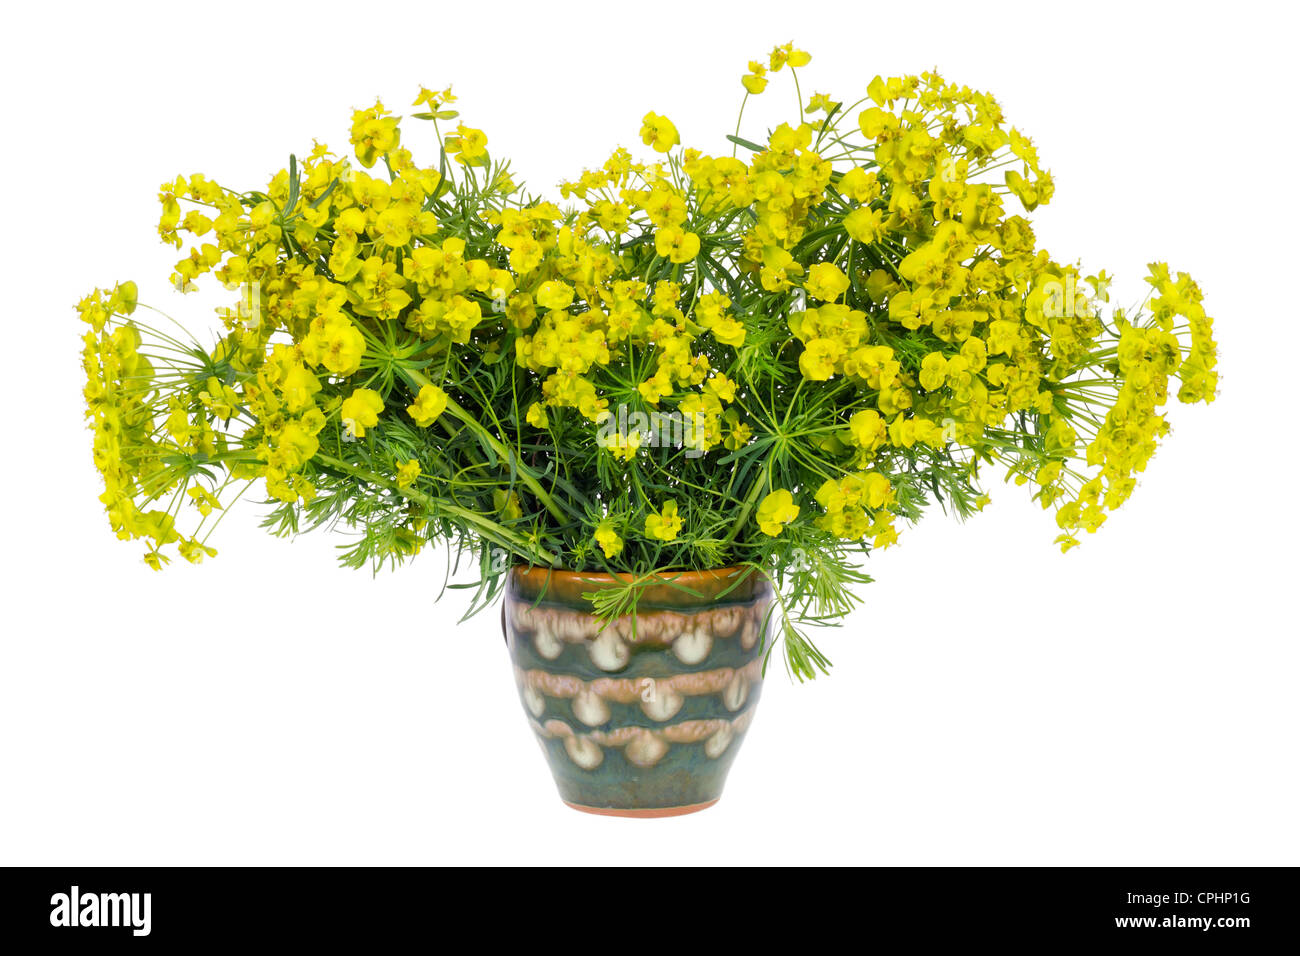 A bouquet from strange plant with many small yellow flowers in a ceramic vase. Isolated Stock Photo